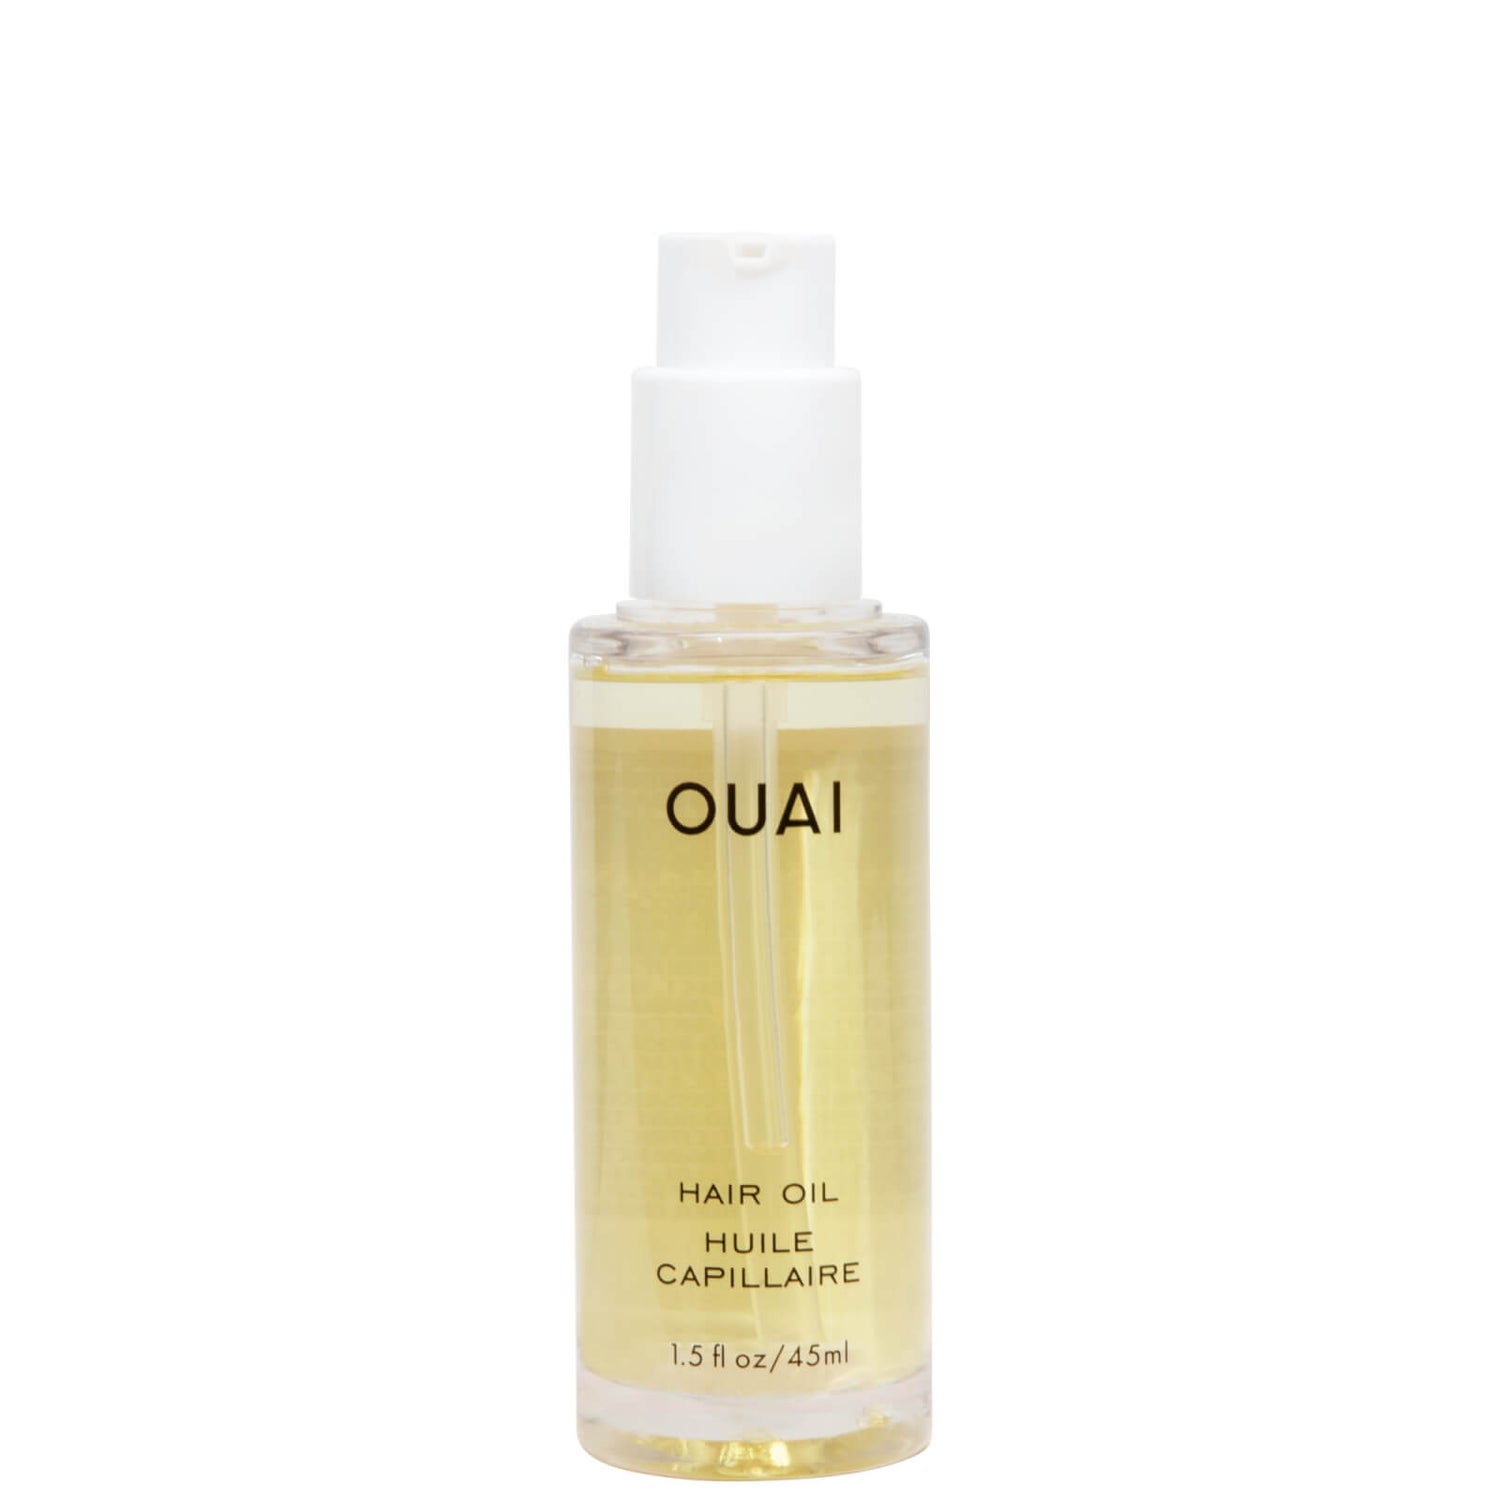 OUAI Hair Oil 45ml - FREE Delivery